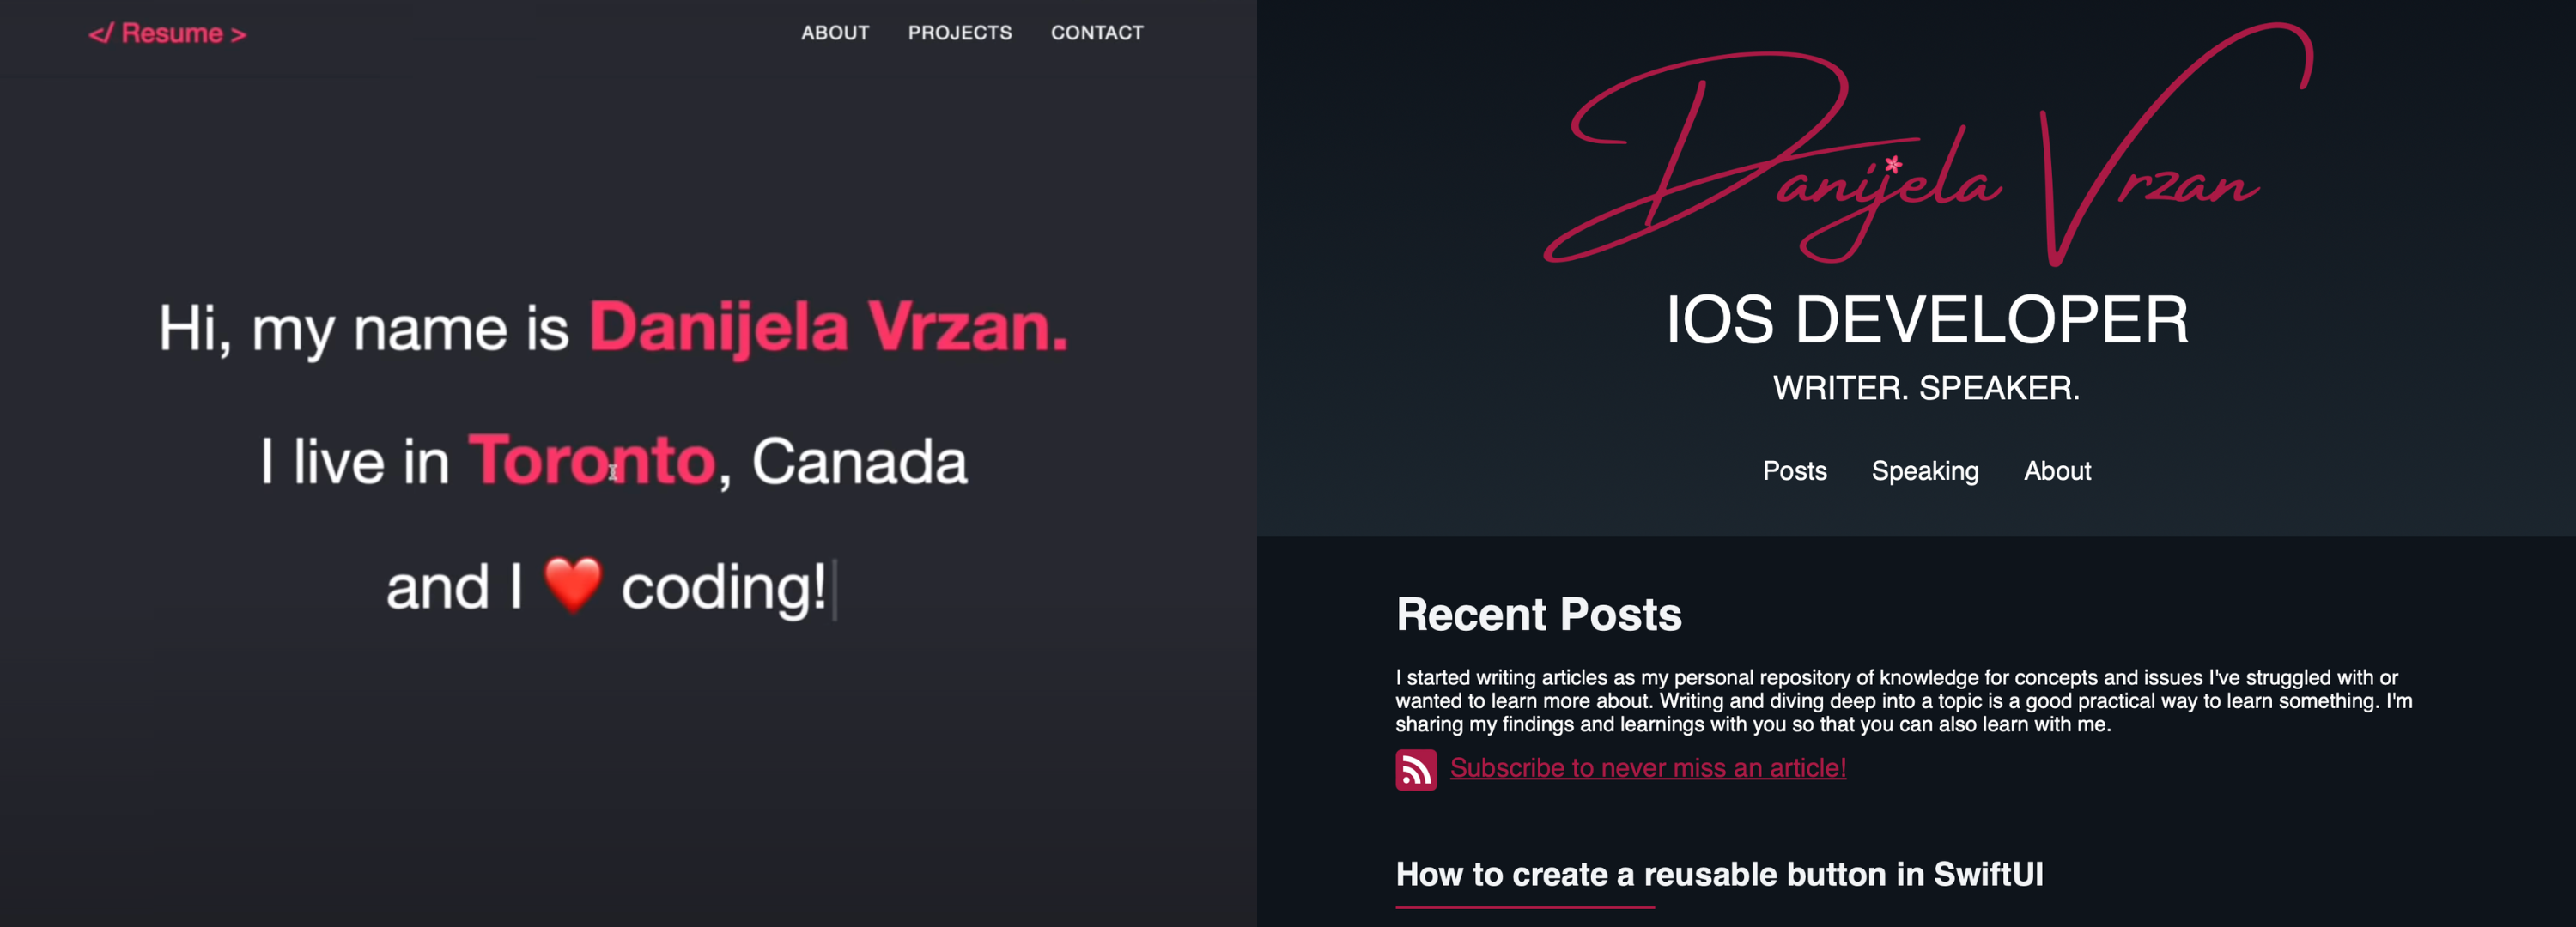 Old version of my website in CSS and HTML on the left and the new version in Swift using Publish on the right.